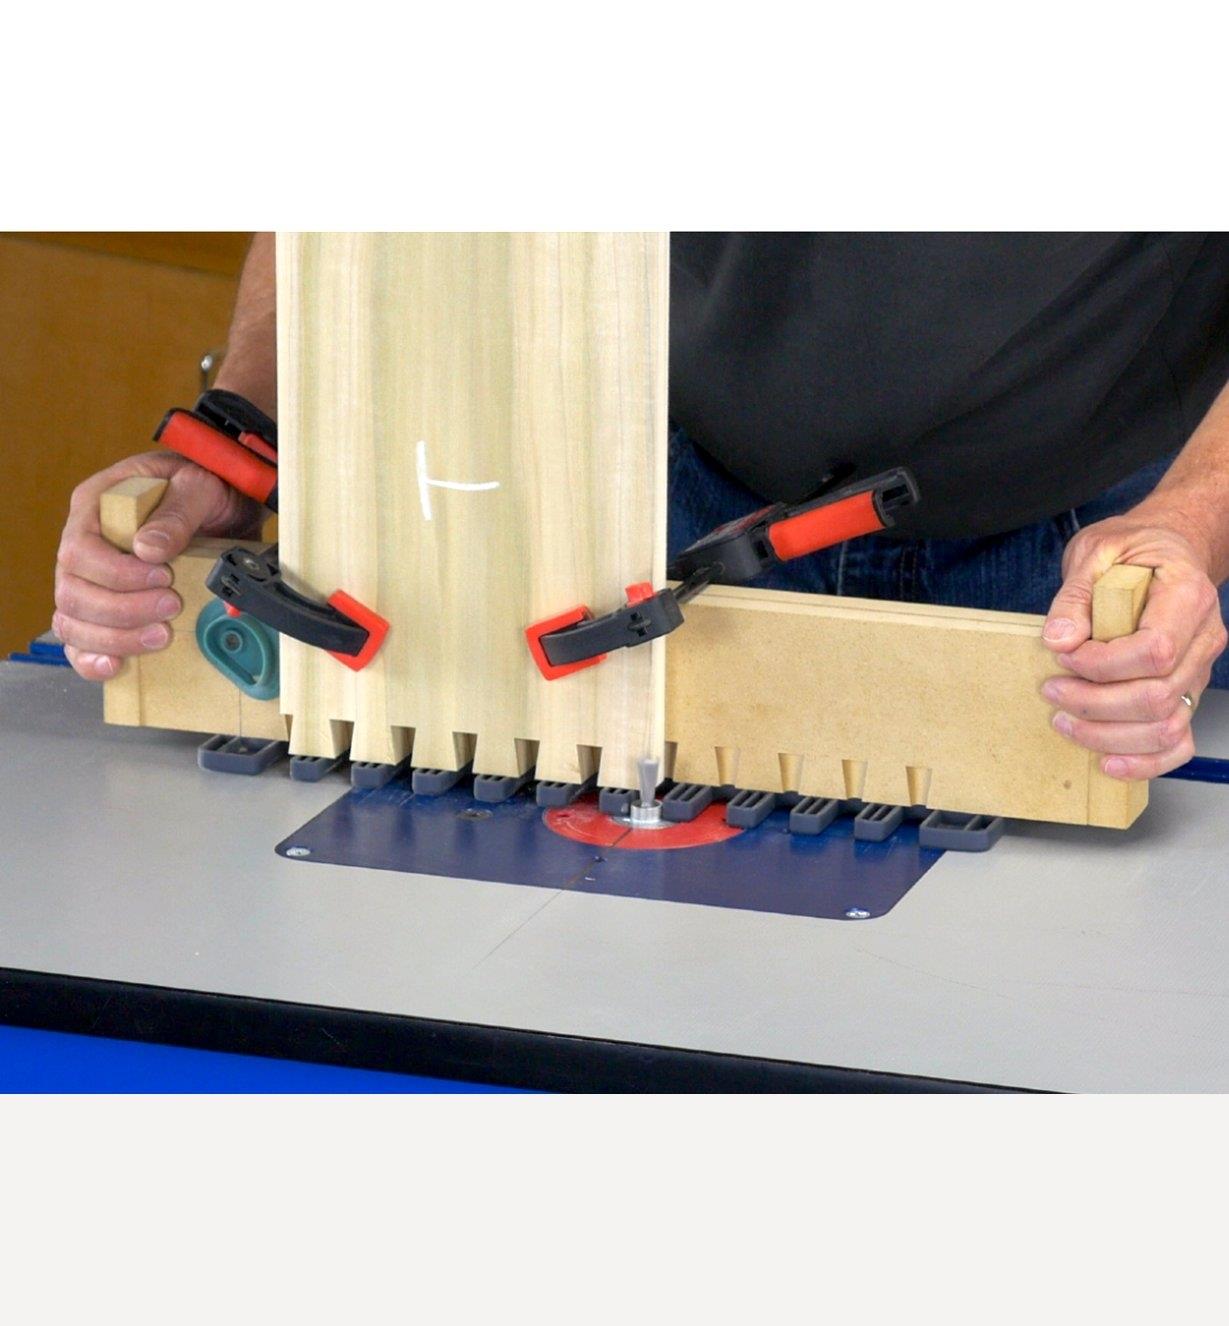 Diy Dovetail Jig For Router Table 56 Off Www Bculinarylab Com